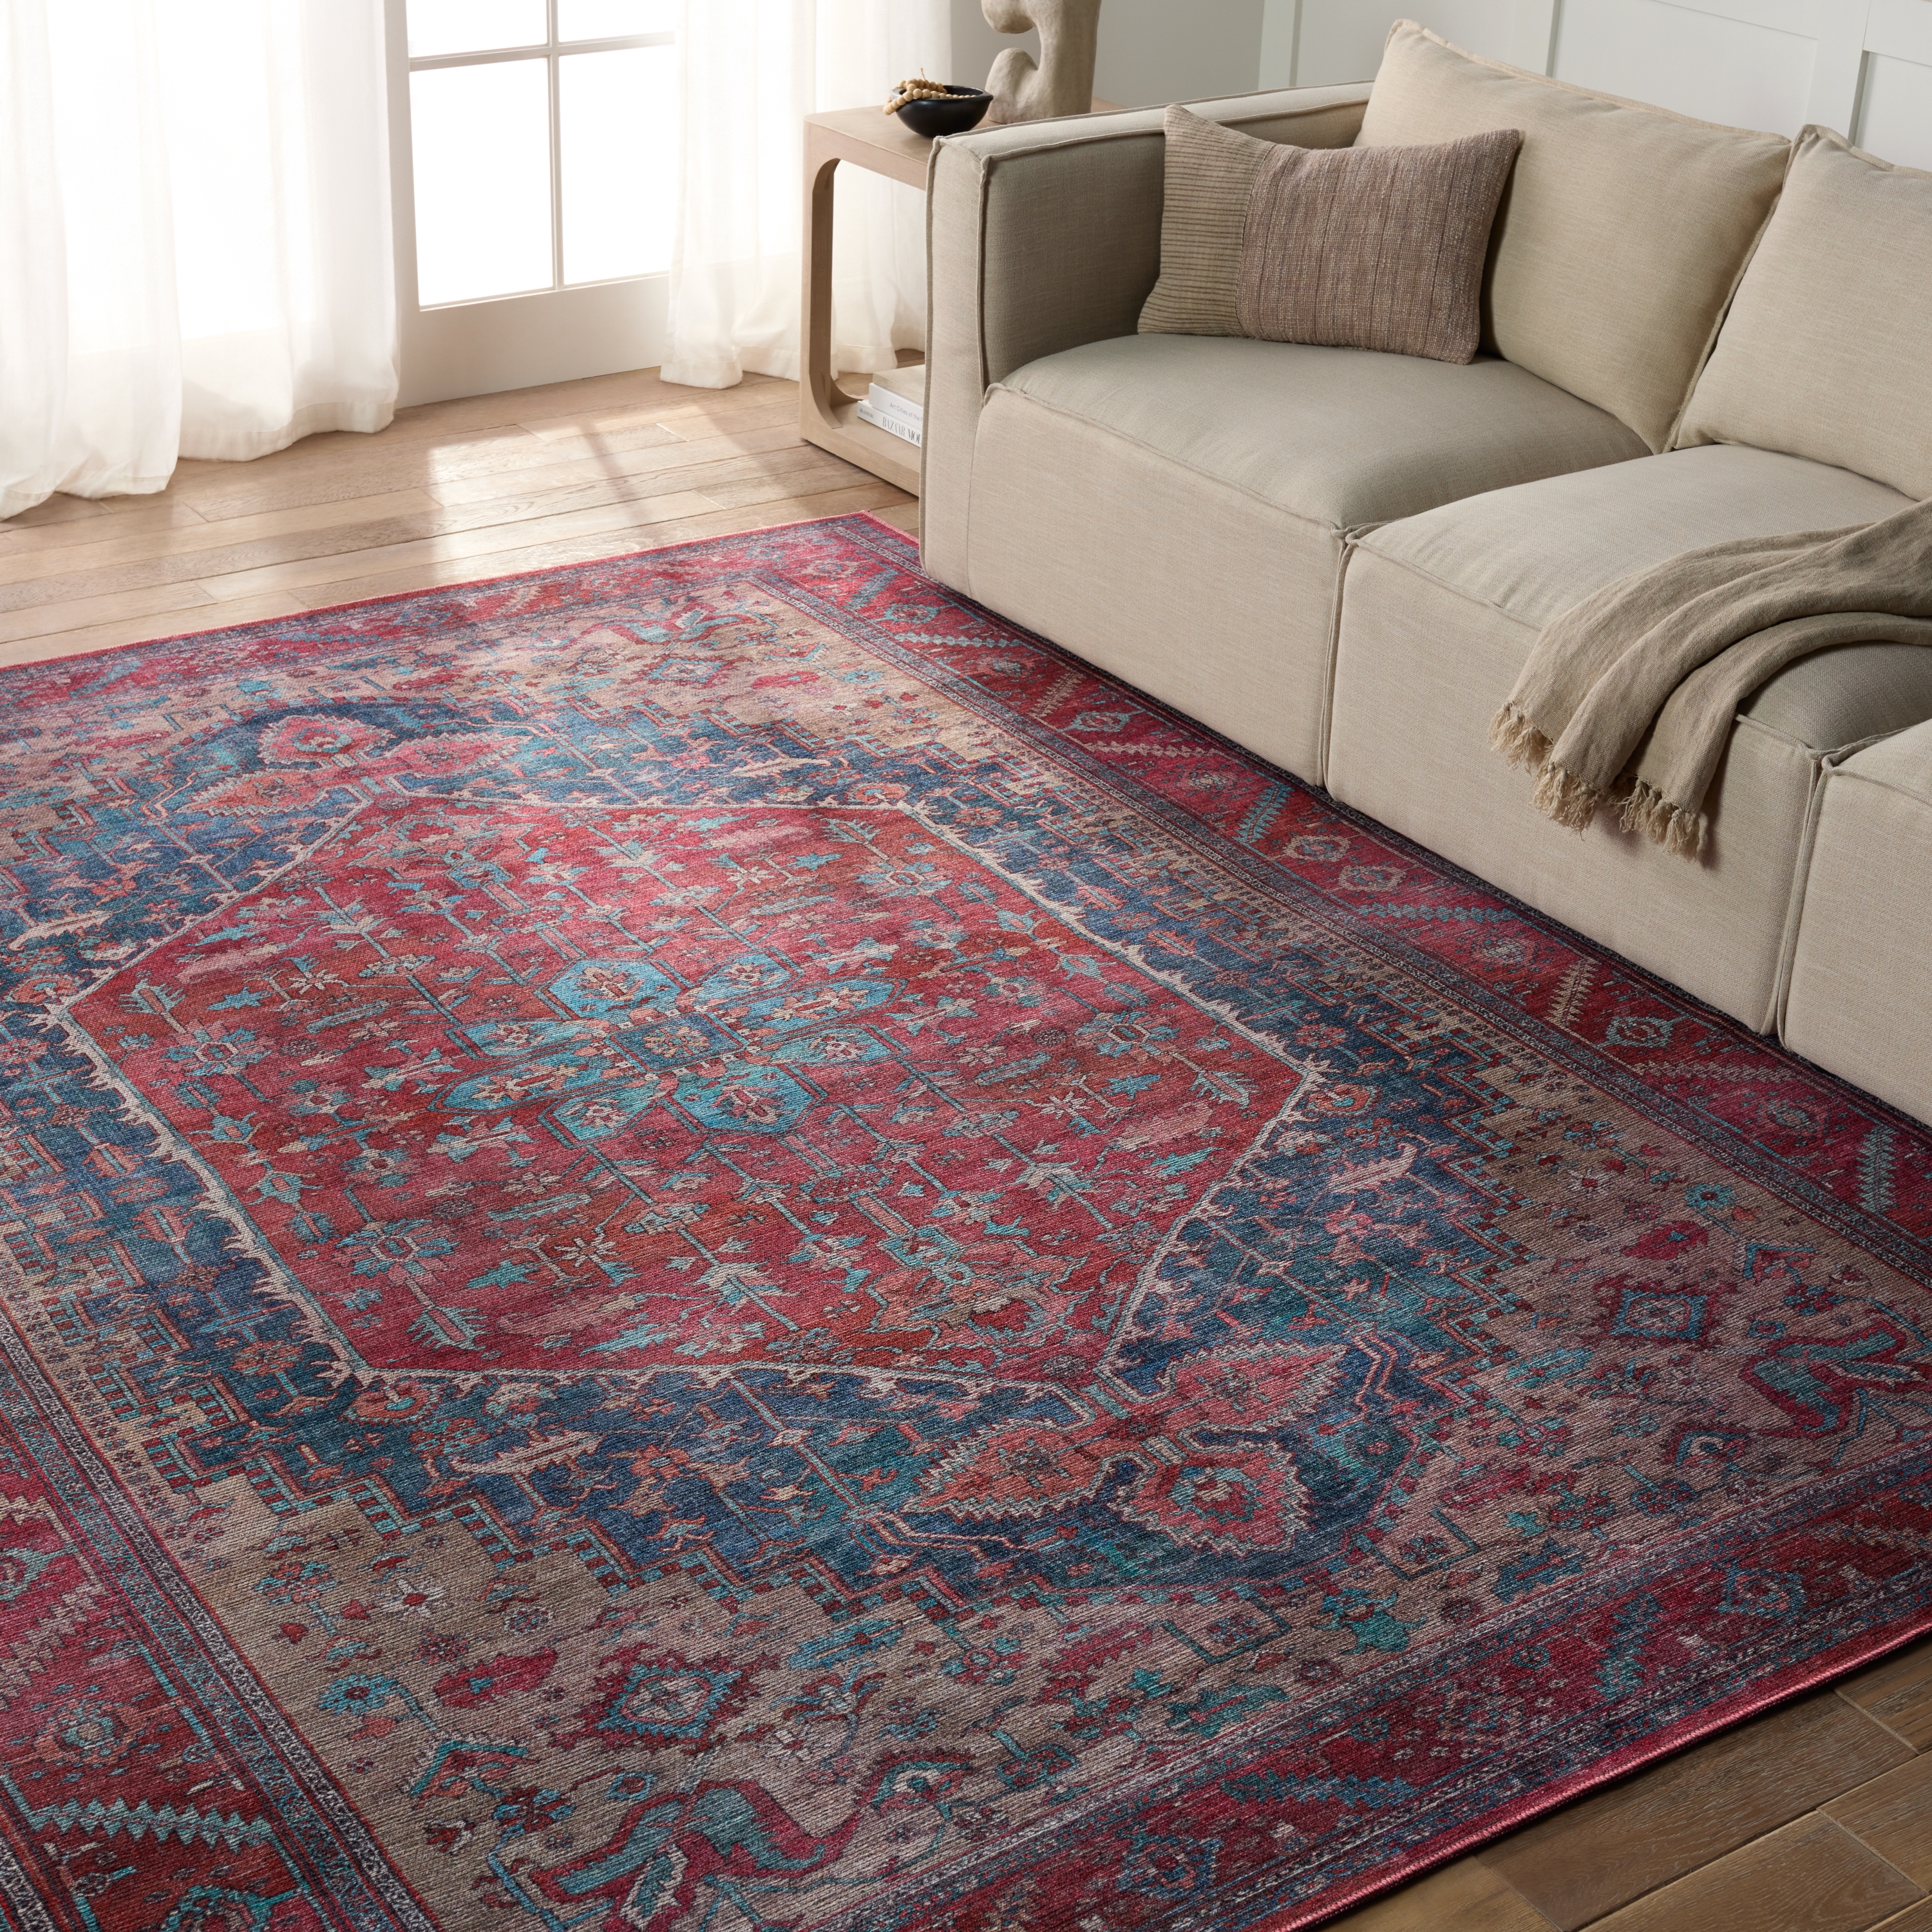 Vibe by Fairbanks Medallion Red/ Blue Area Rug (9'2"X12') - Image 4